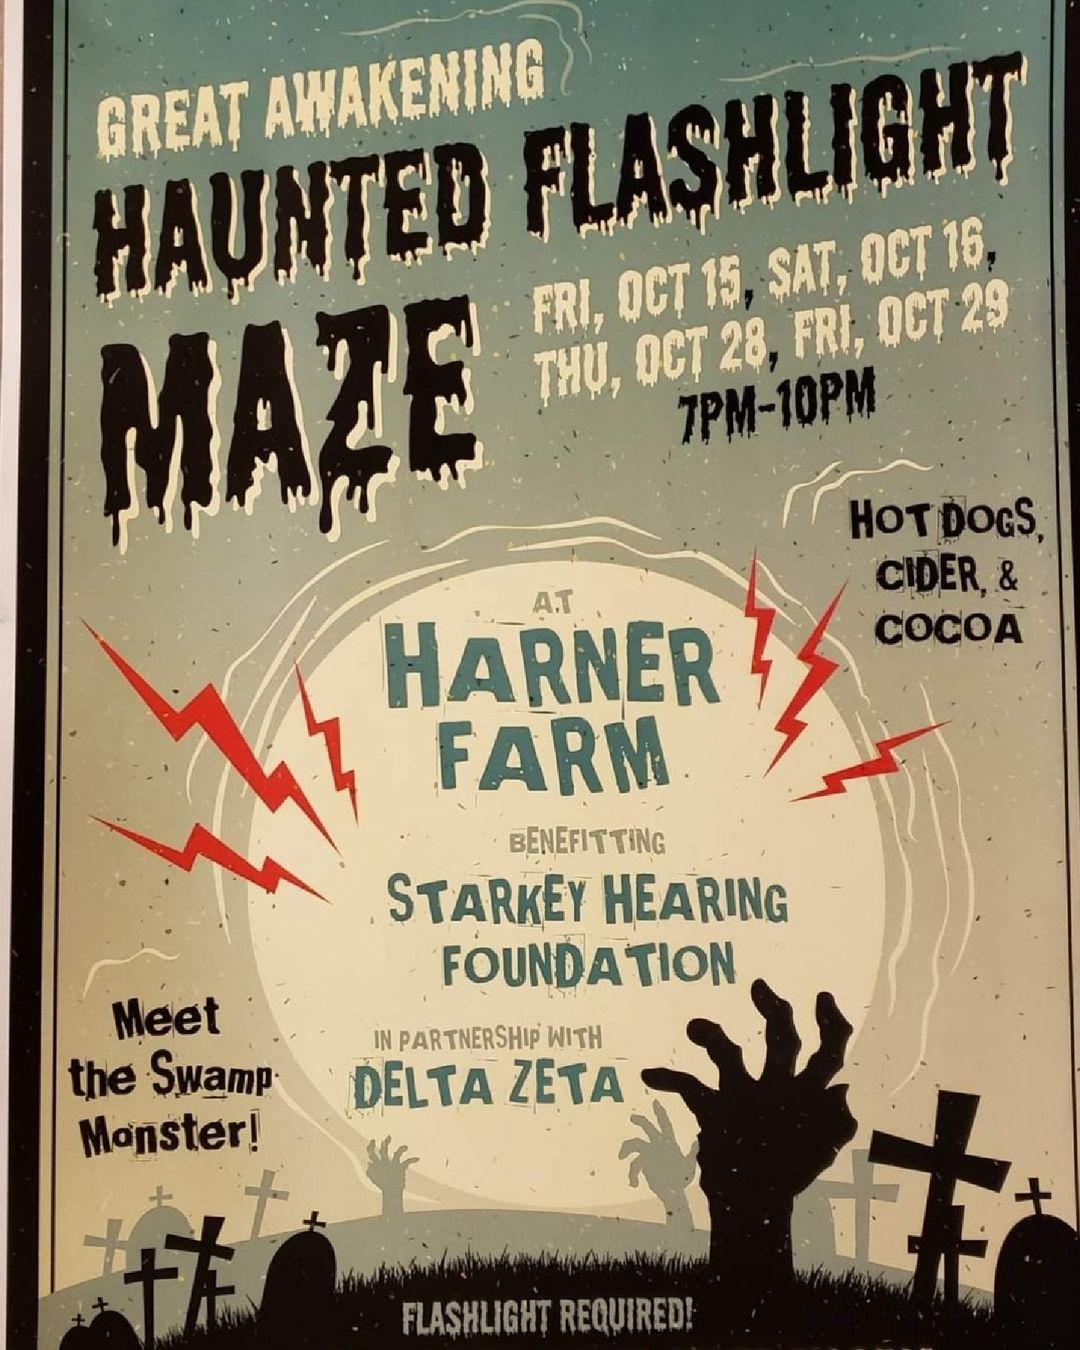 Head out to #HVAgventures destination @harnerfarm today and tomorrow for their Haunted Flashlight Maze! Don't forget your own flashlight 